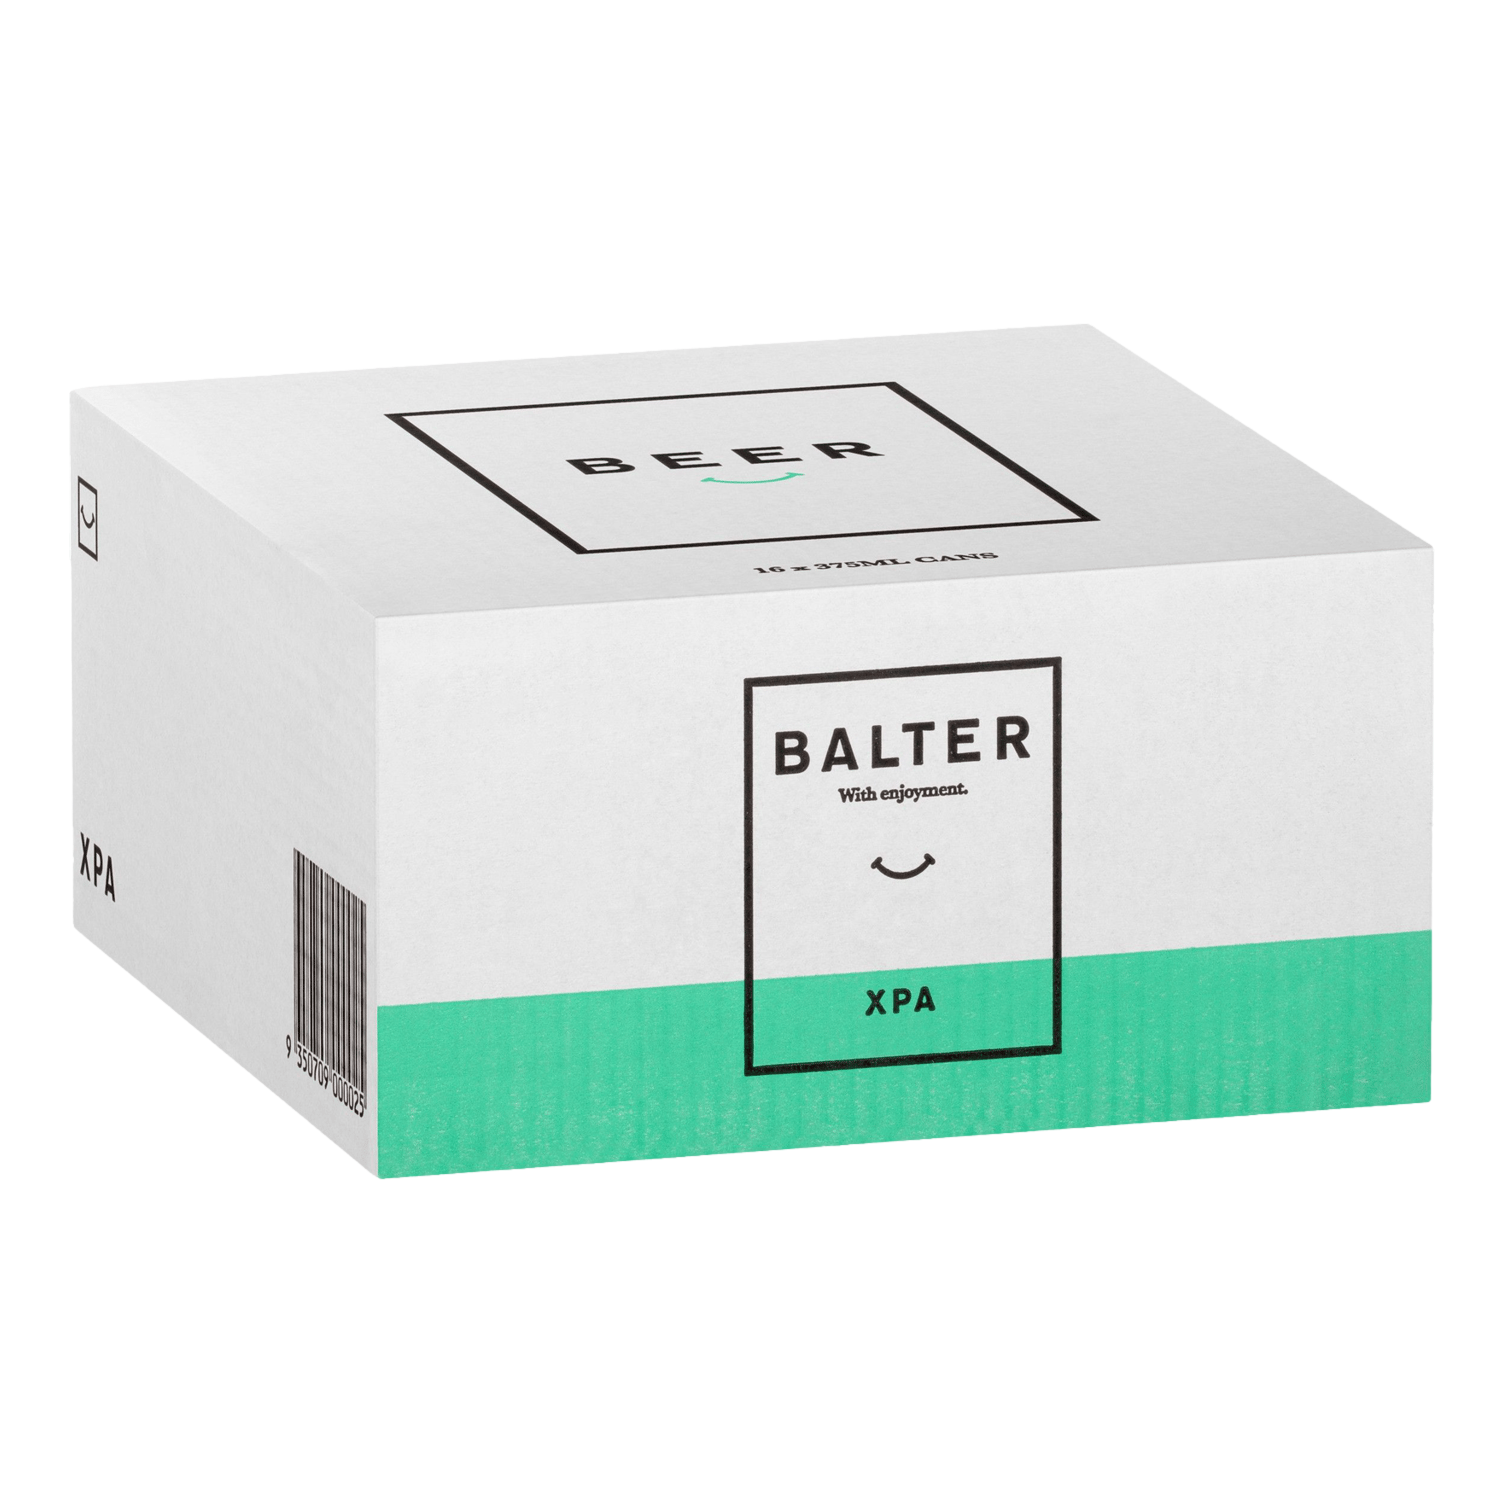 Balter XPA 375ml Can Case of 16